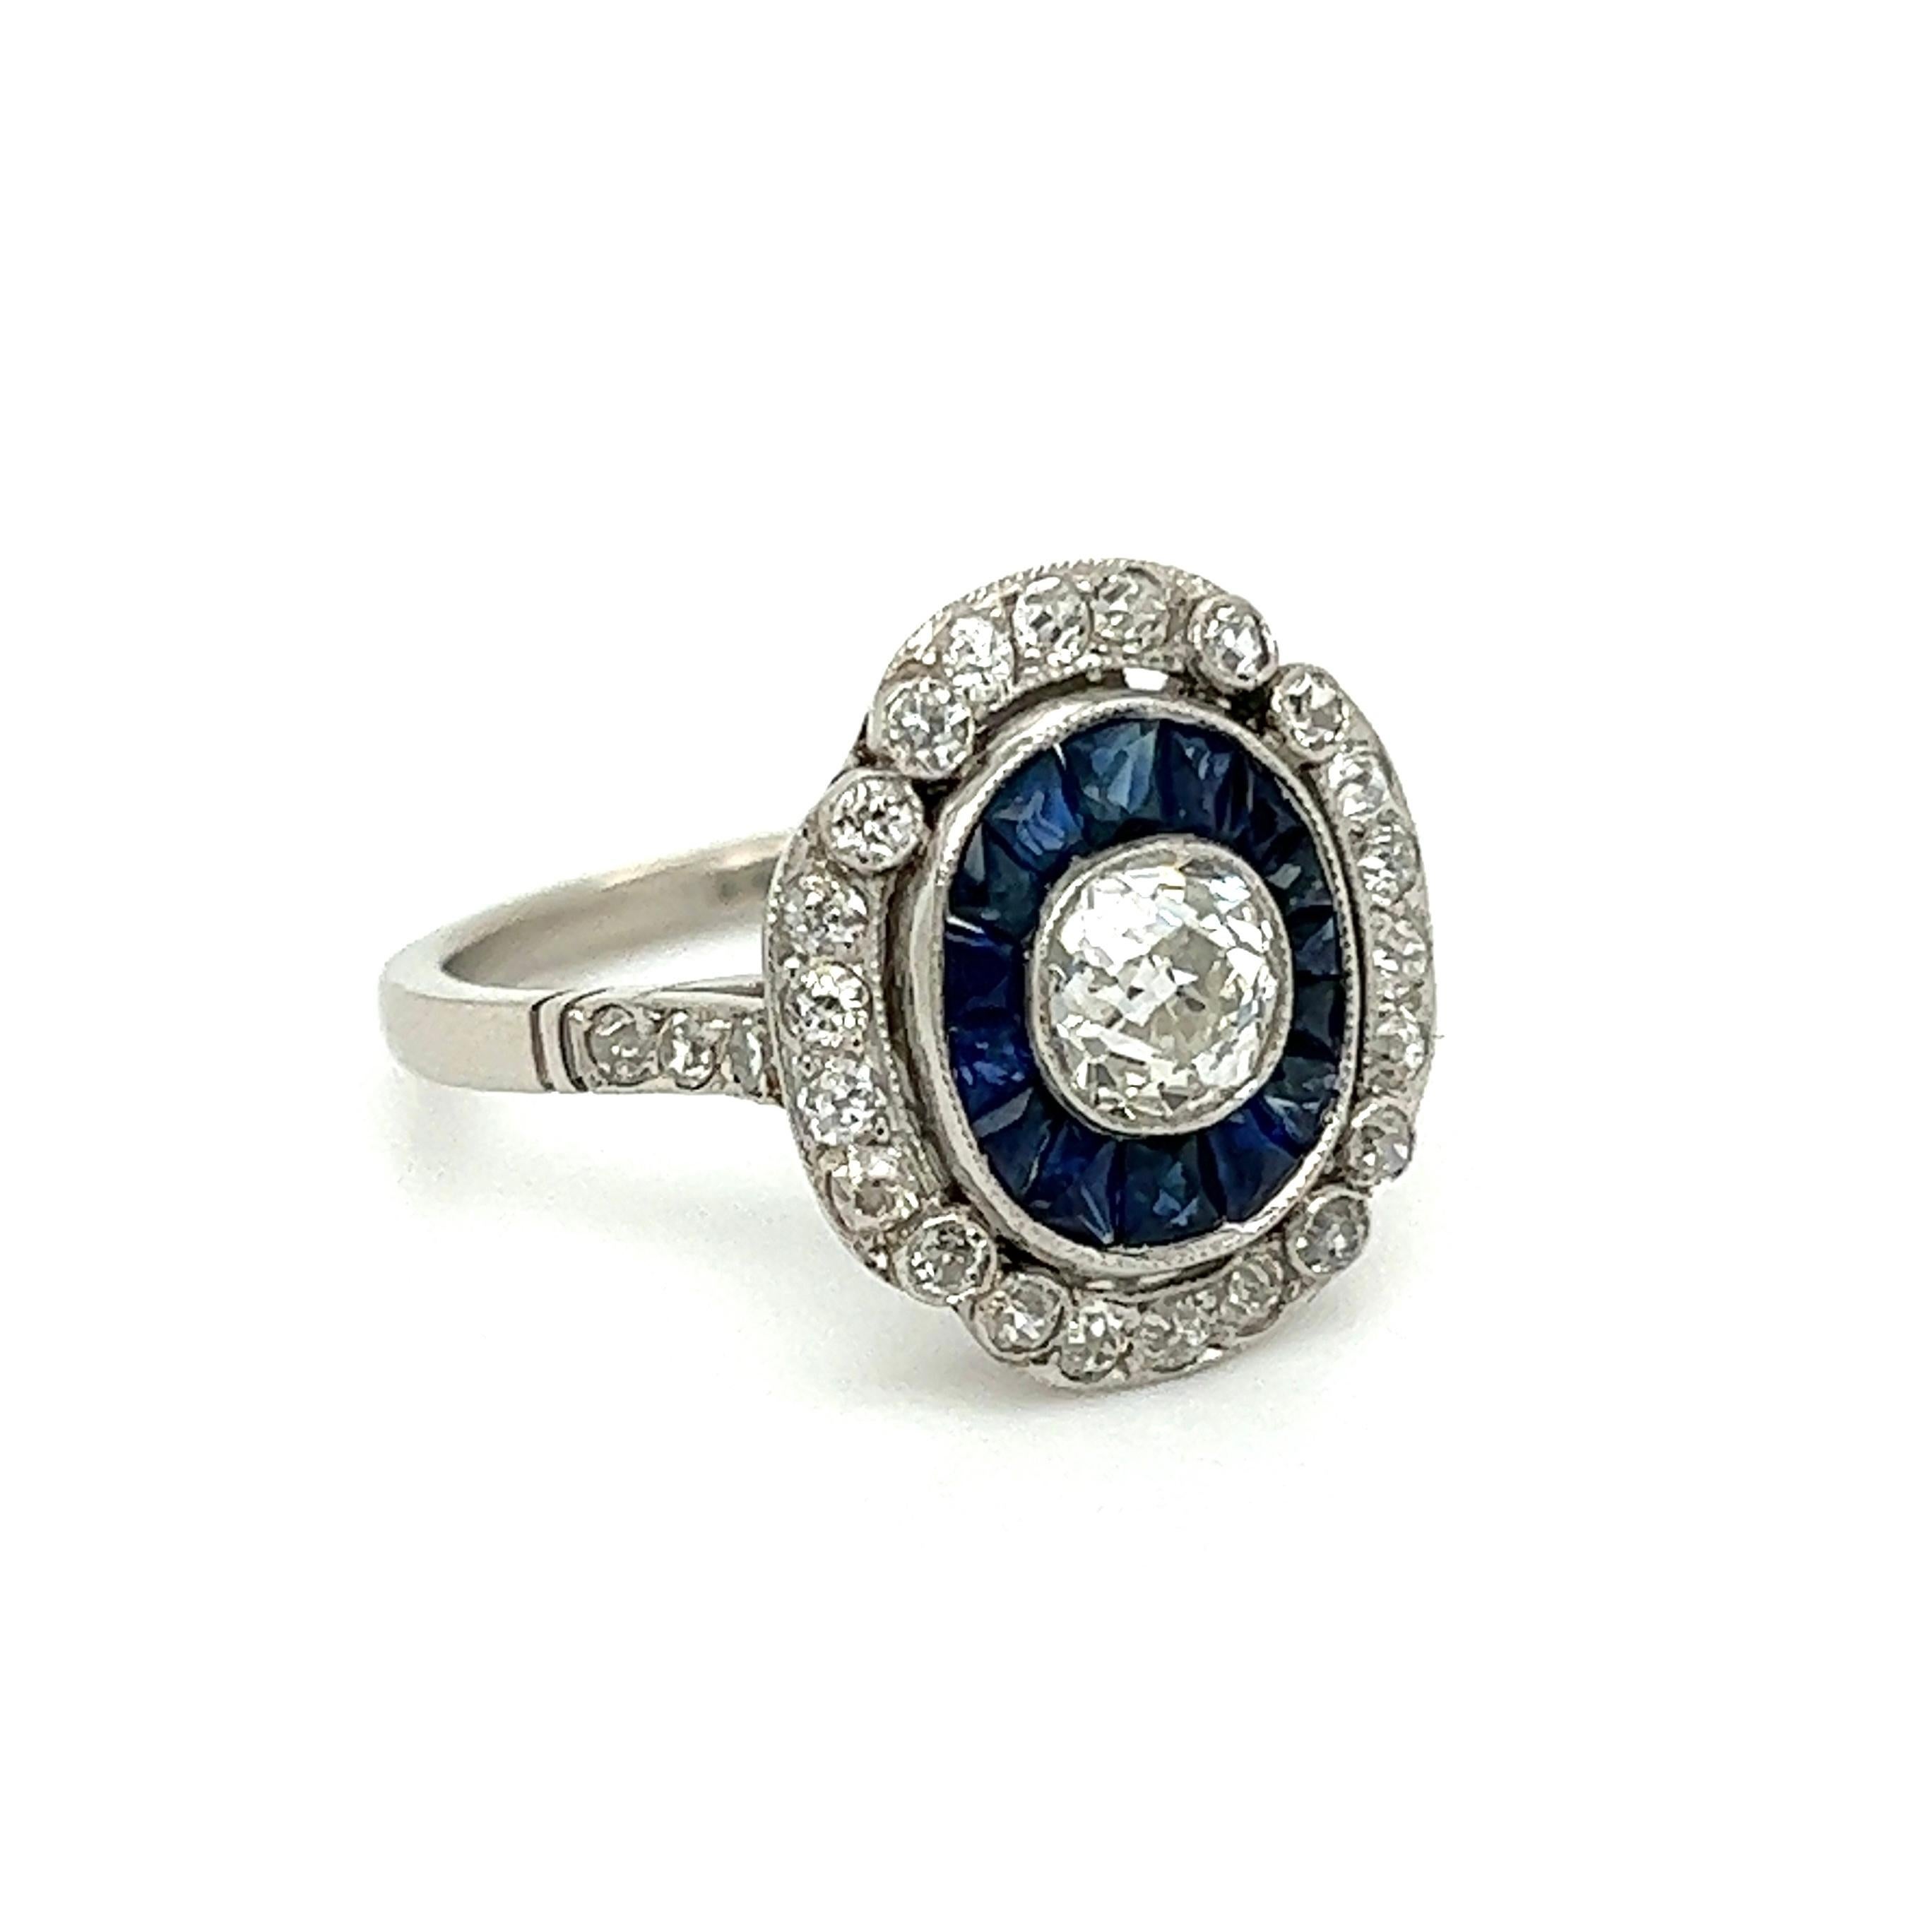 Simply Beautiful! Blue Sapphire and Diamond Cocktail Ring. Centering a securely nestled Hand set Old Mine-Cut Diamond, weighing 0.65 Carat. Surrounded by Sapphires weighing approx. 2.00tcw and Diamonds approx. 1.04tcw. Hand crafted Platinum